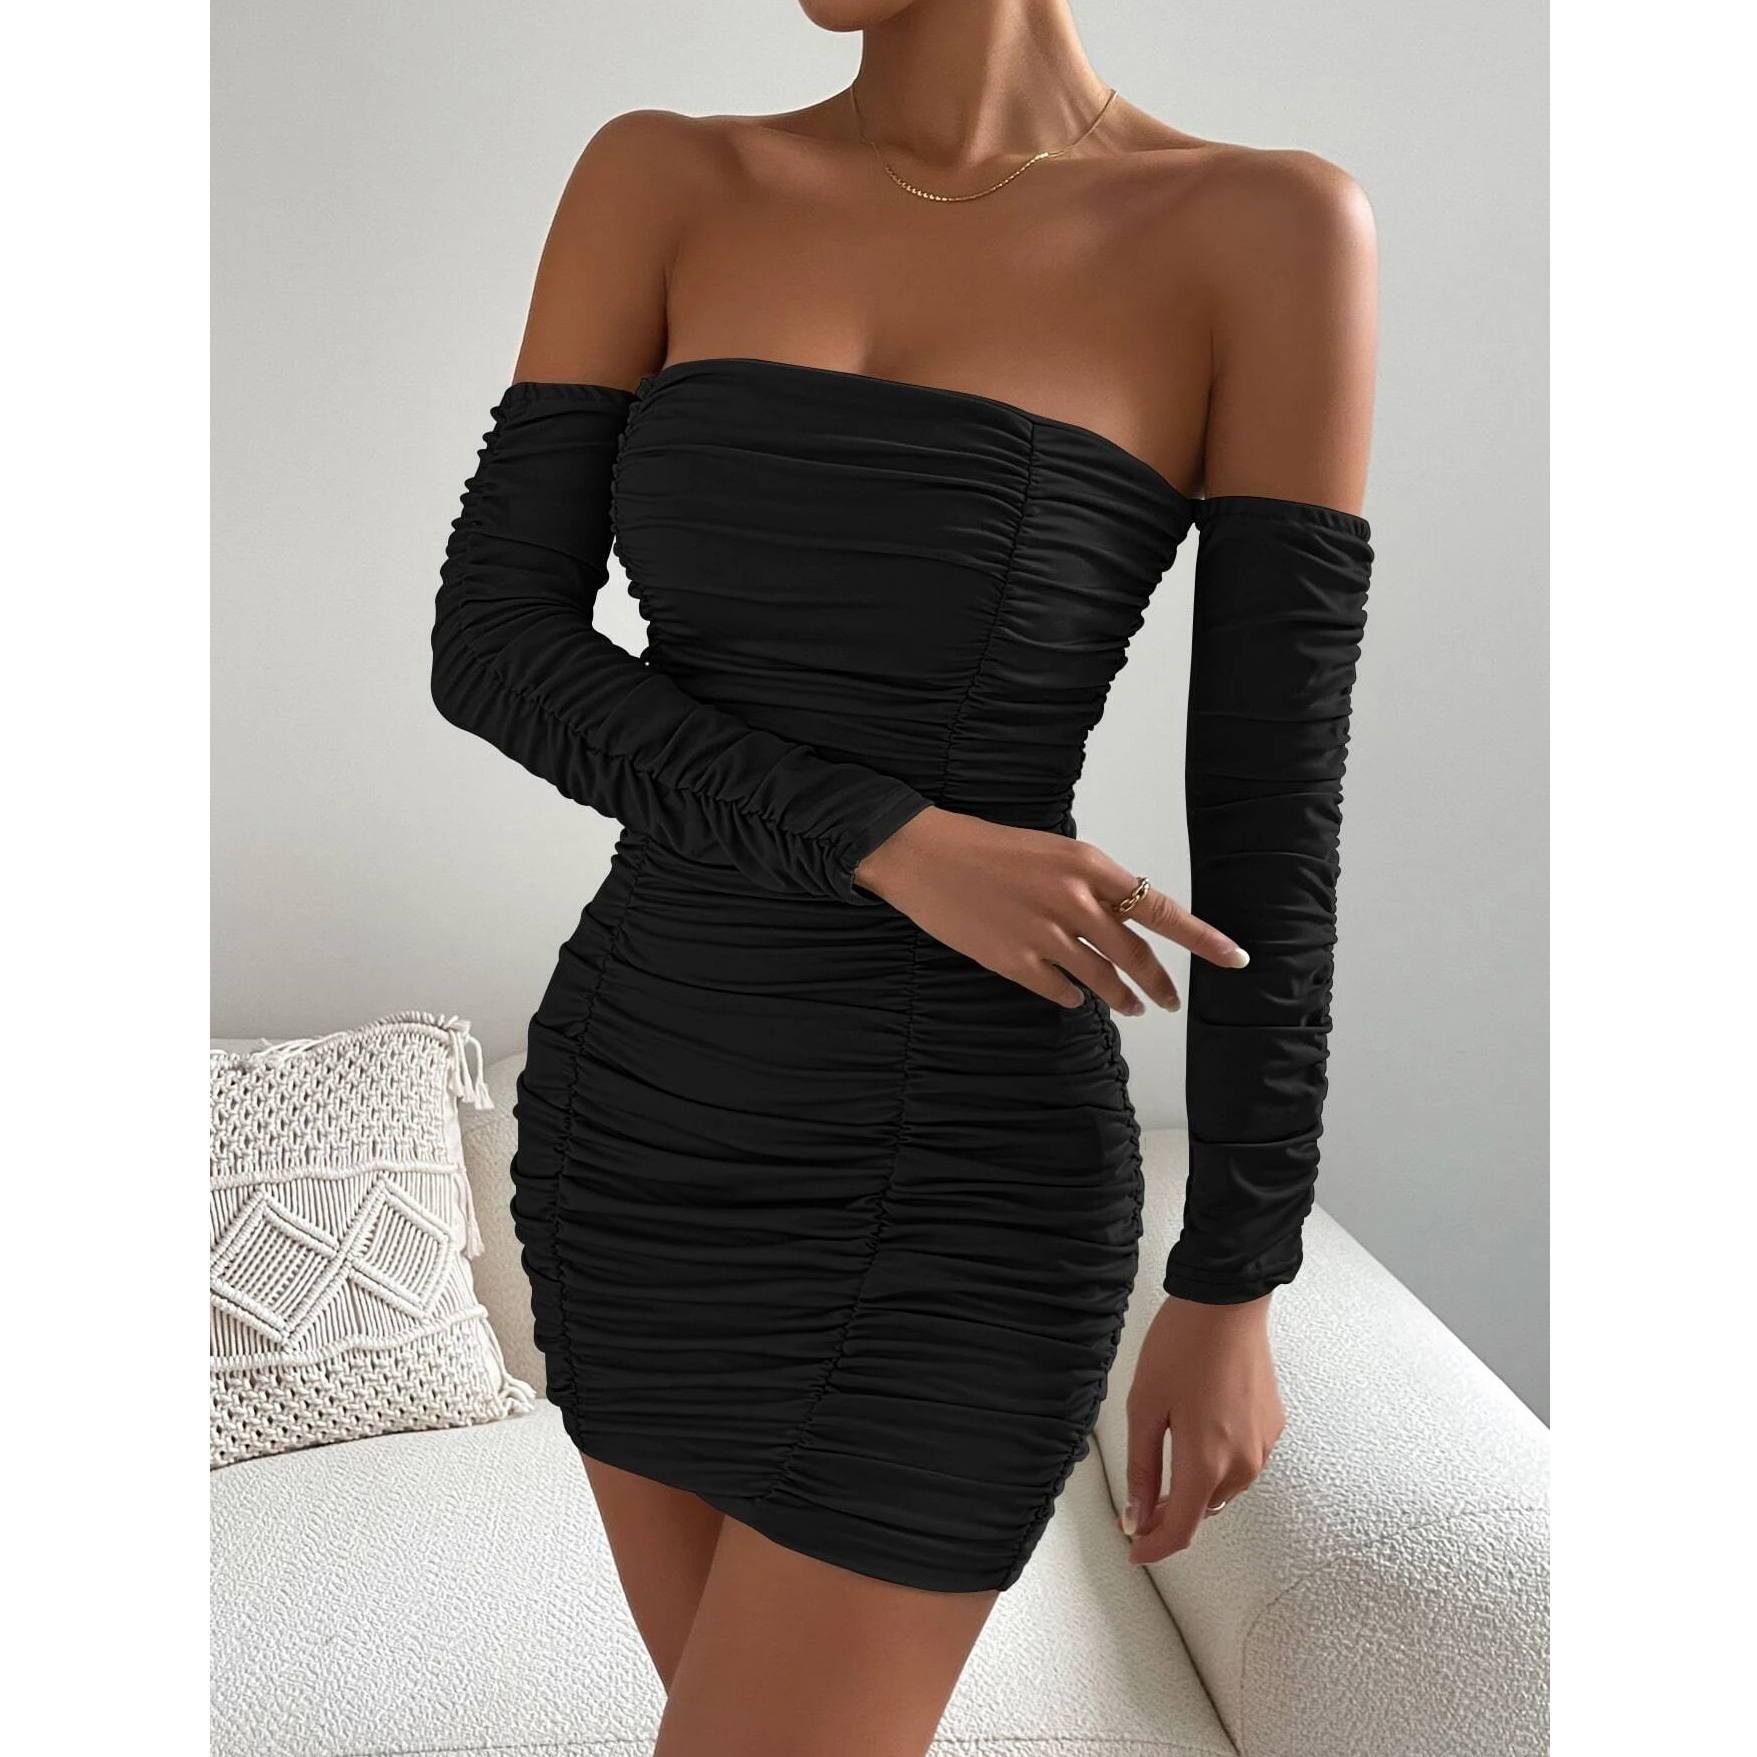 Off Shoulder Ruched Bodycon Dress - Black, Small(4)